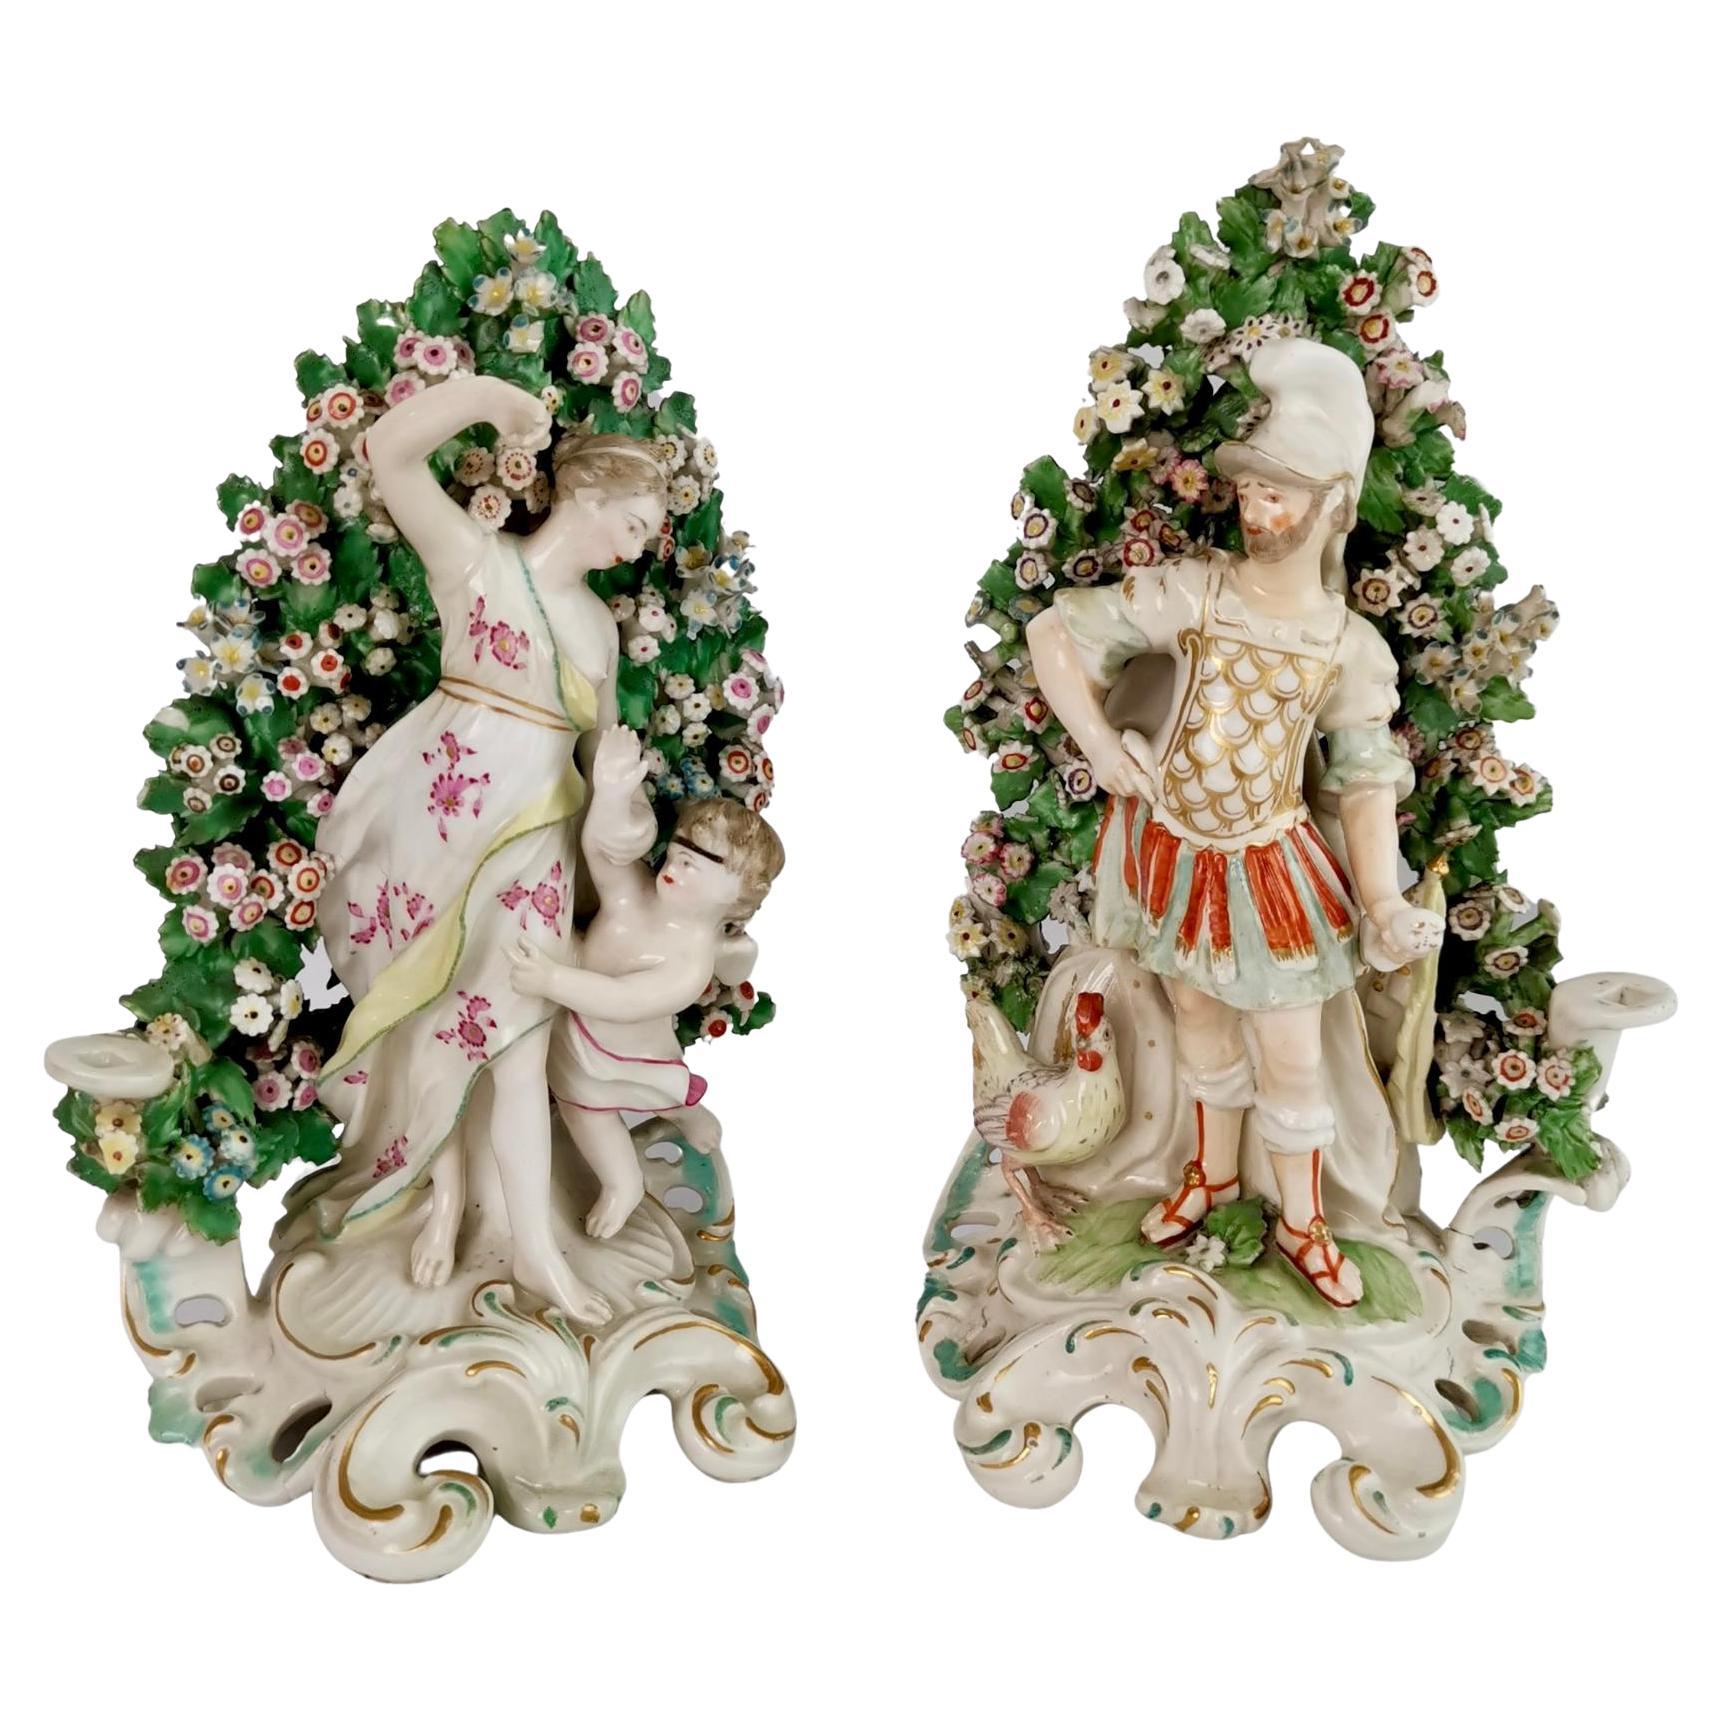 Pair of Derby Porcelain Figures of Mars and Venus, Rococo, 1759-1769